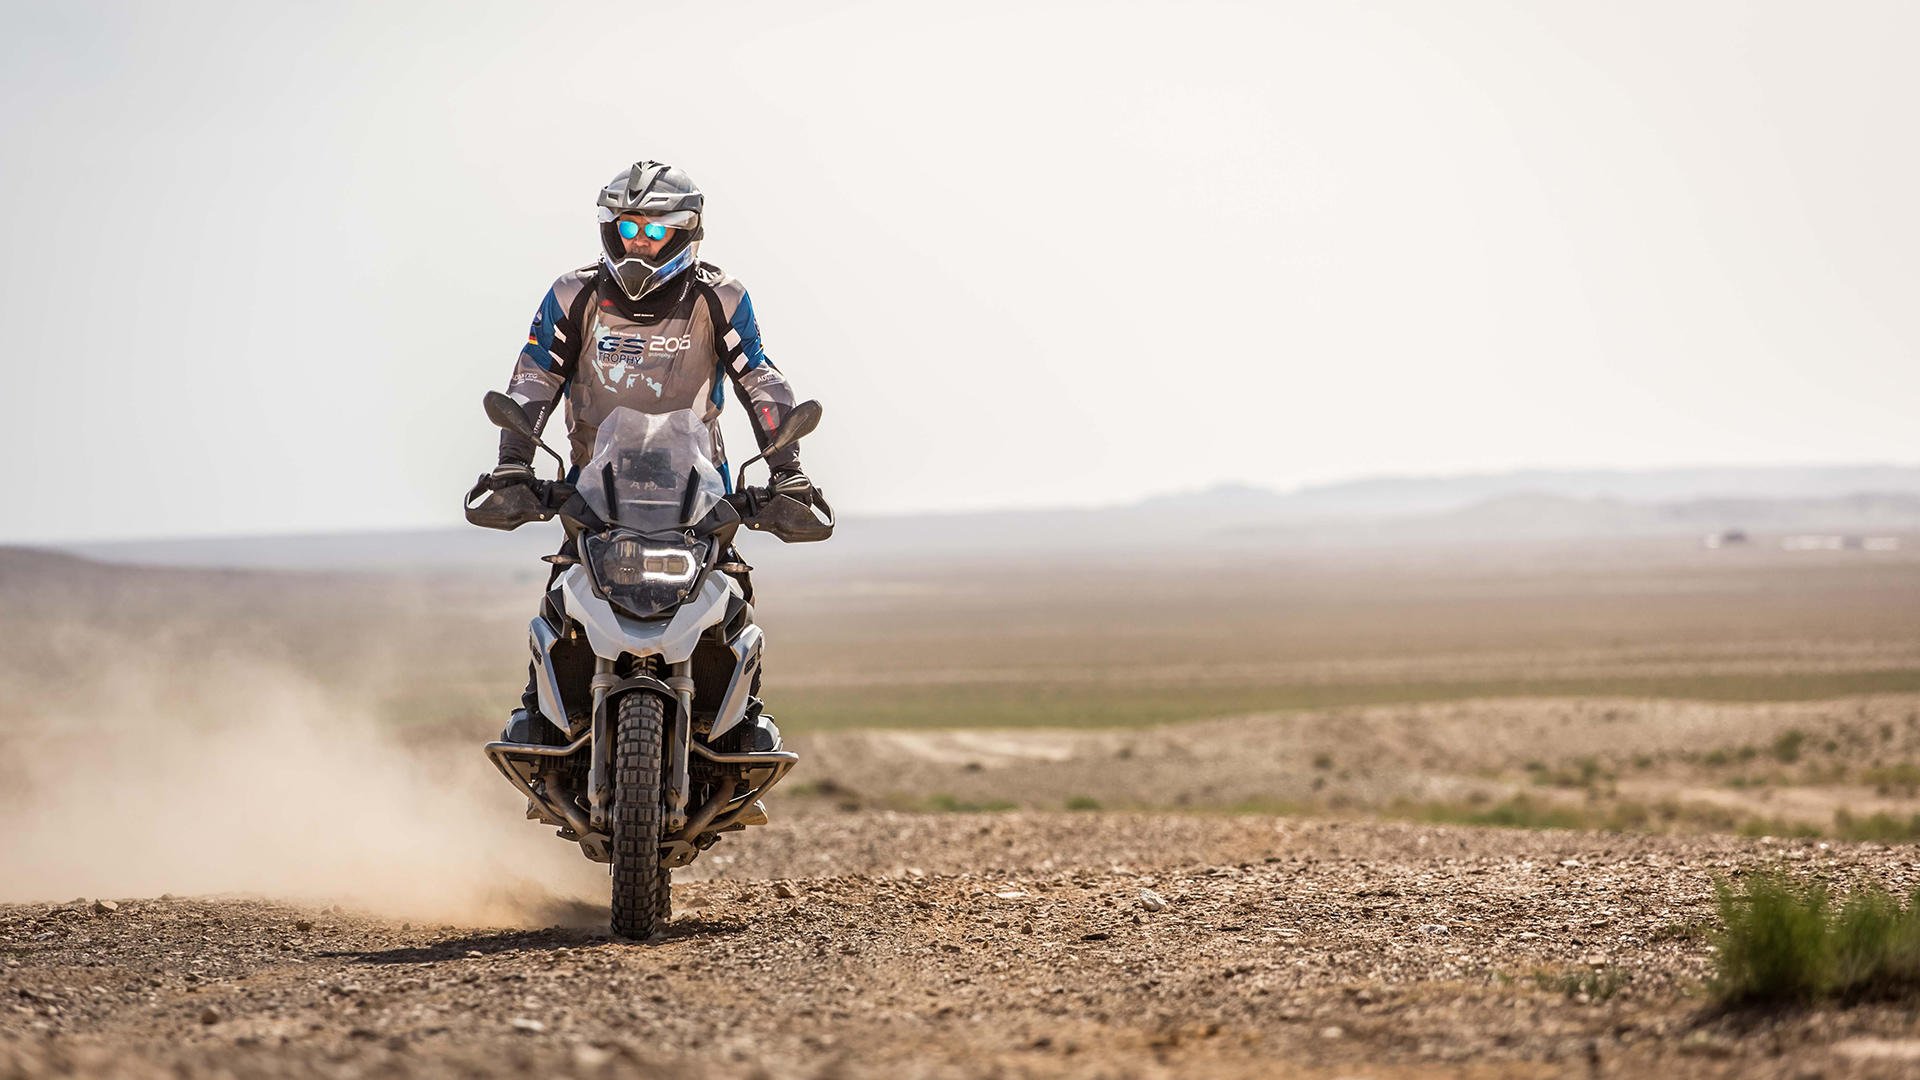 BMWMotorrad on Twitter: "Time for a change? Lifestyle #photographer  @isaacsjohnston switches it up at the #gstrophy to bring you all the Int.  GS Trophy news direct from the depths of Mongolia. Why